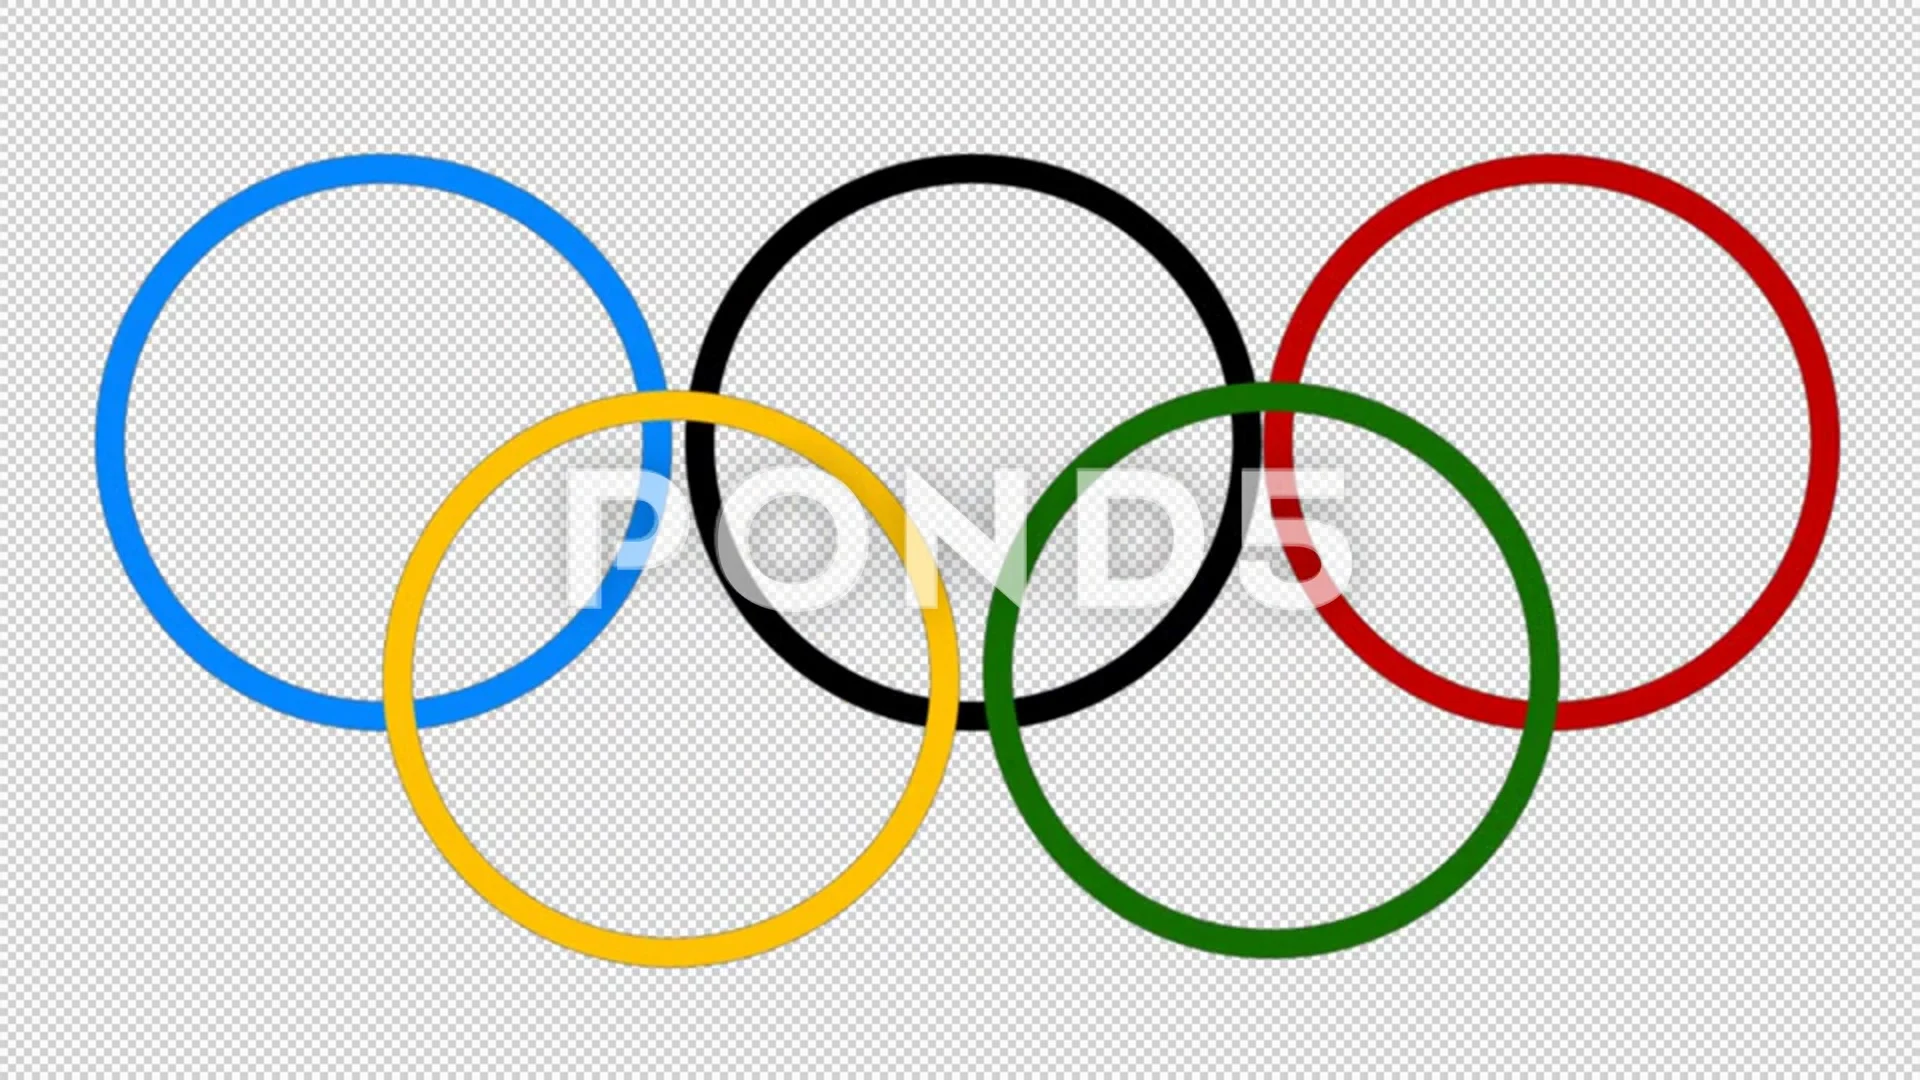 Olympic rings fail spectacularly during Sochi opening ceremony - The Verge